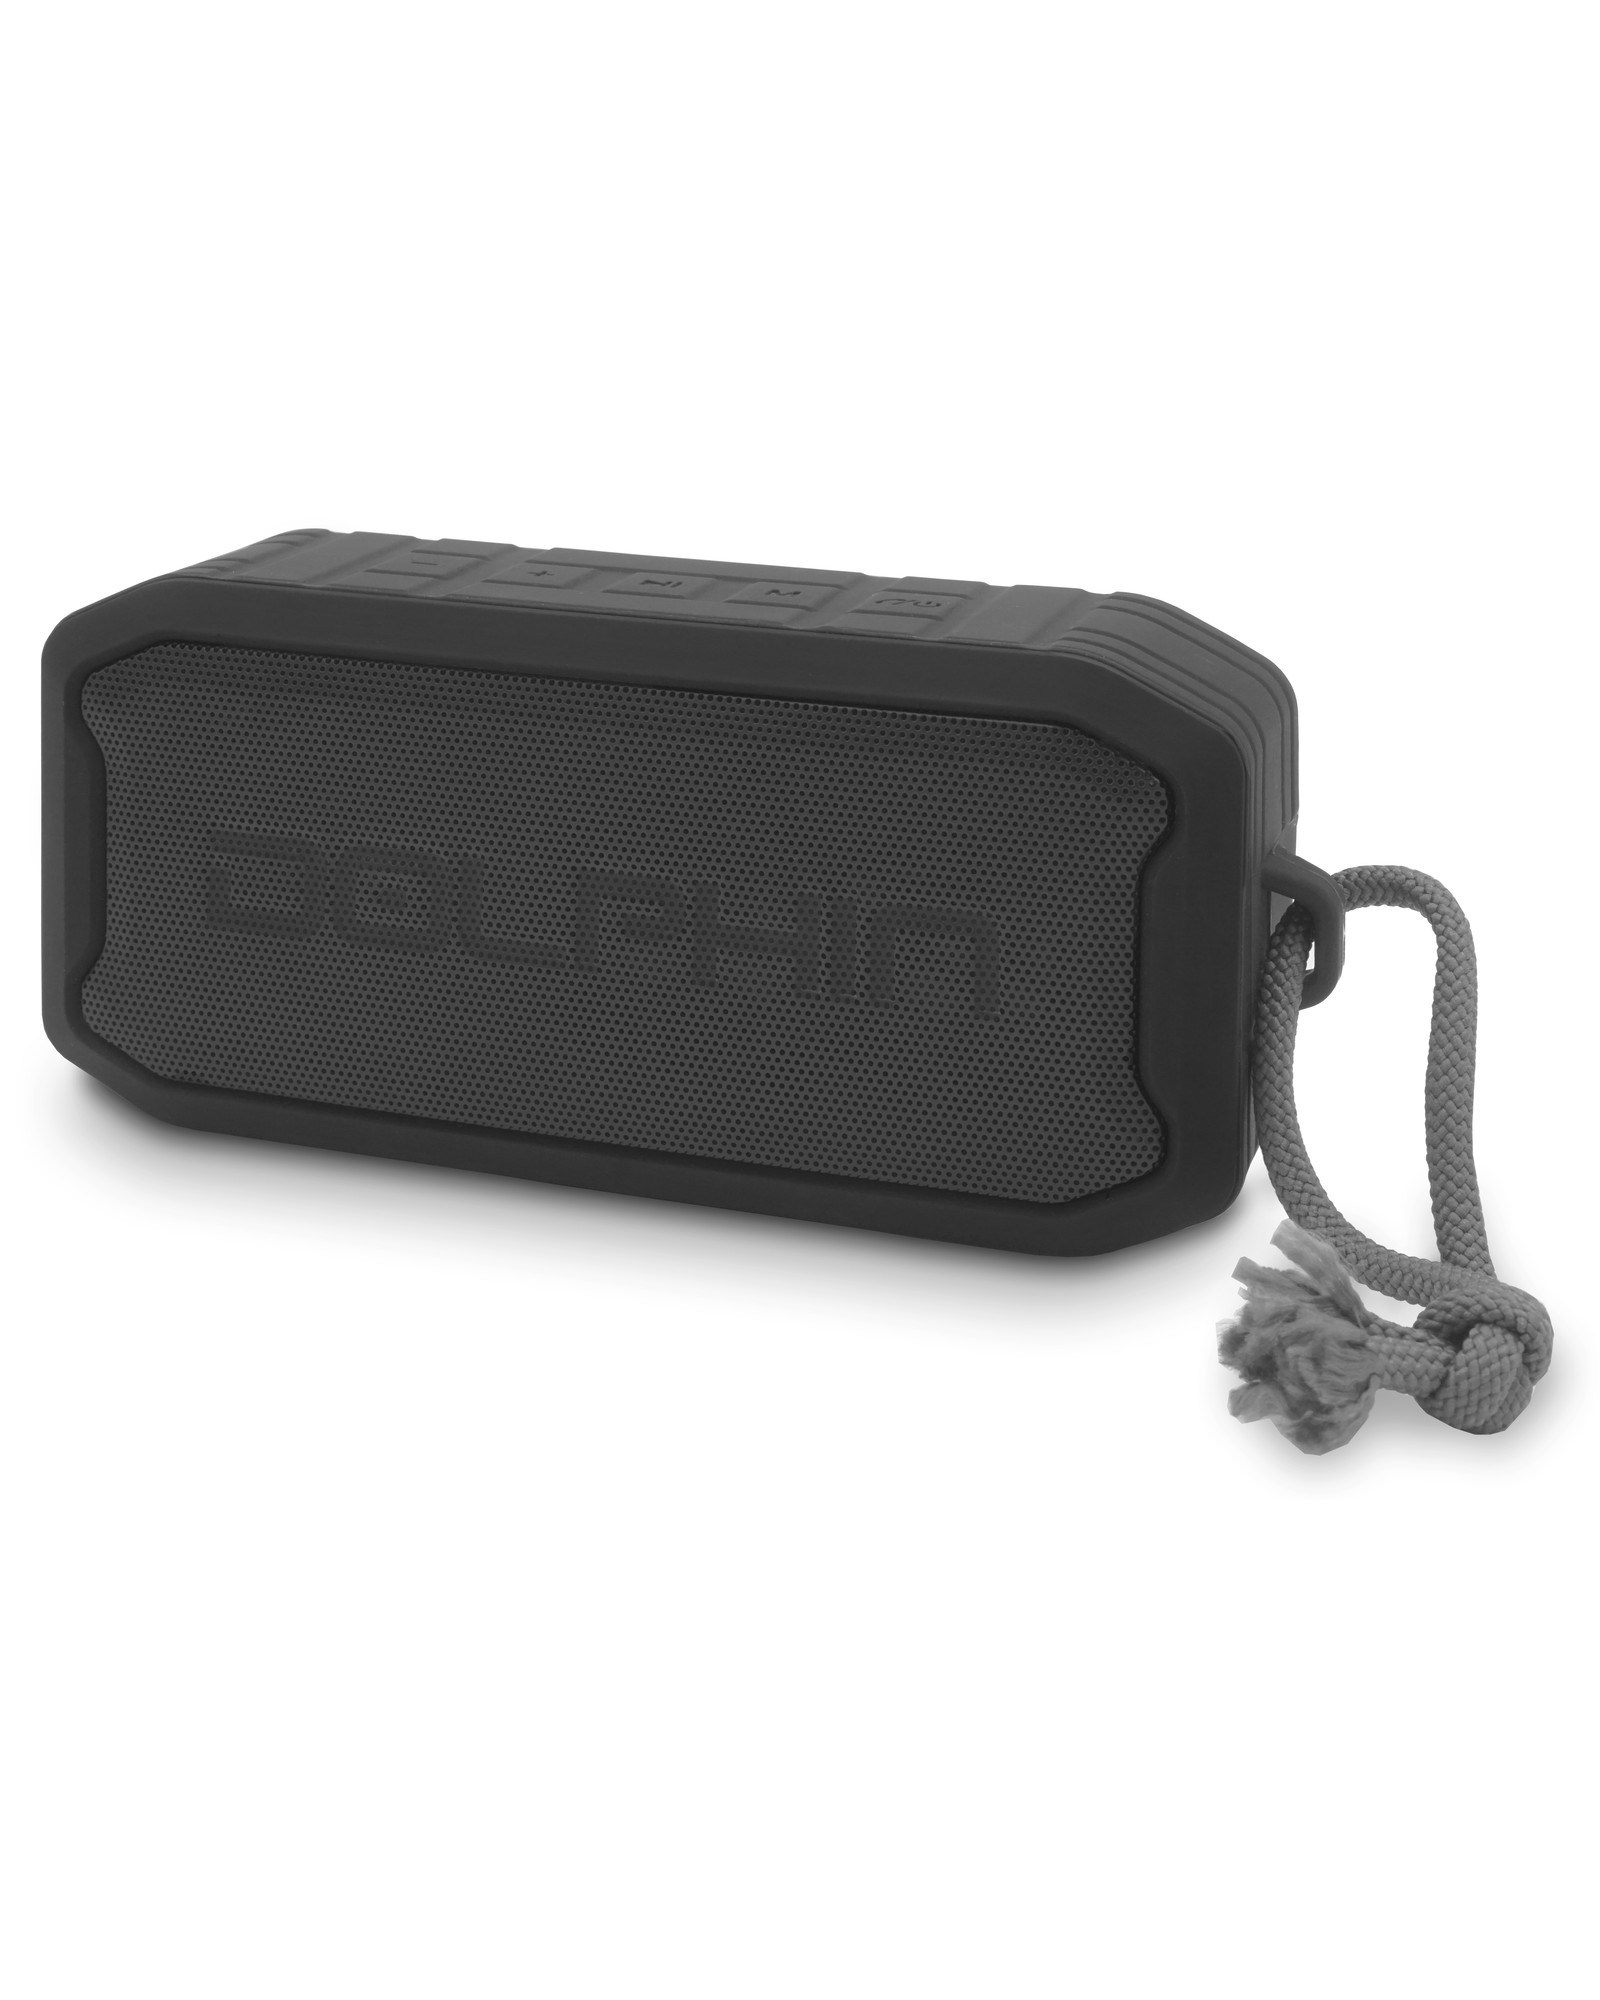 Picture of Dolphin Audio DR-20 Dolphin Audio Portable Bluetooth Speaker, Black